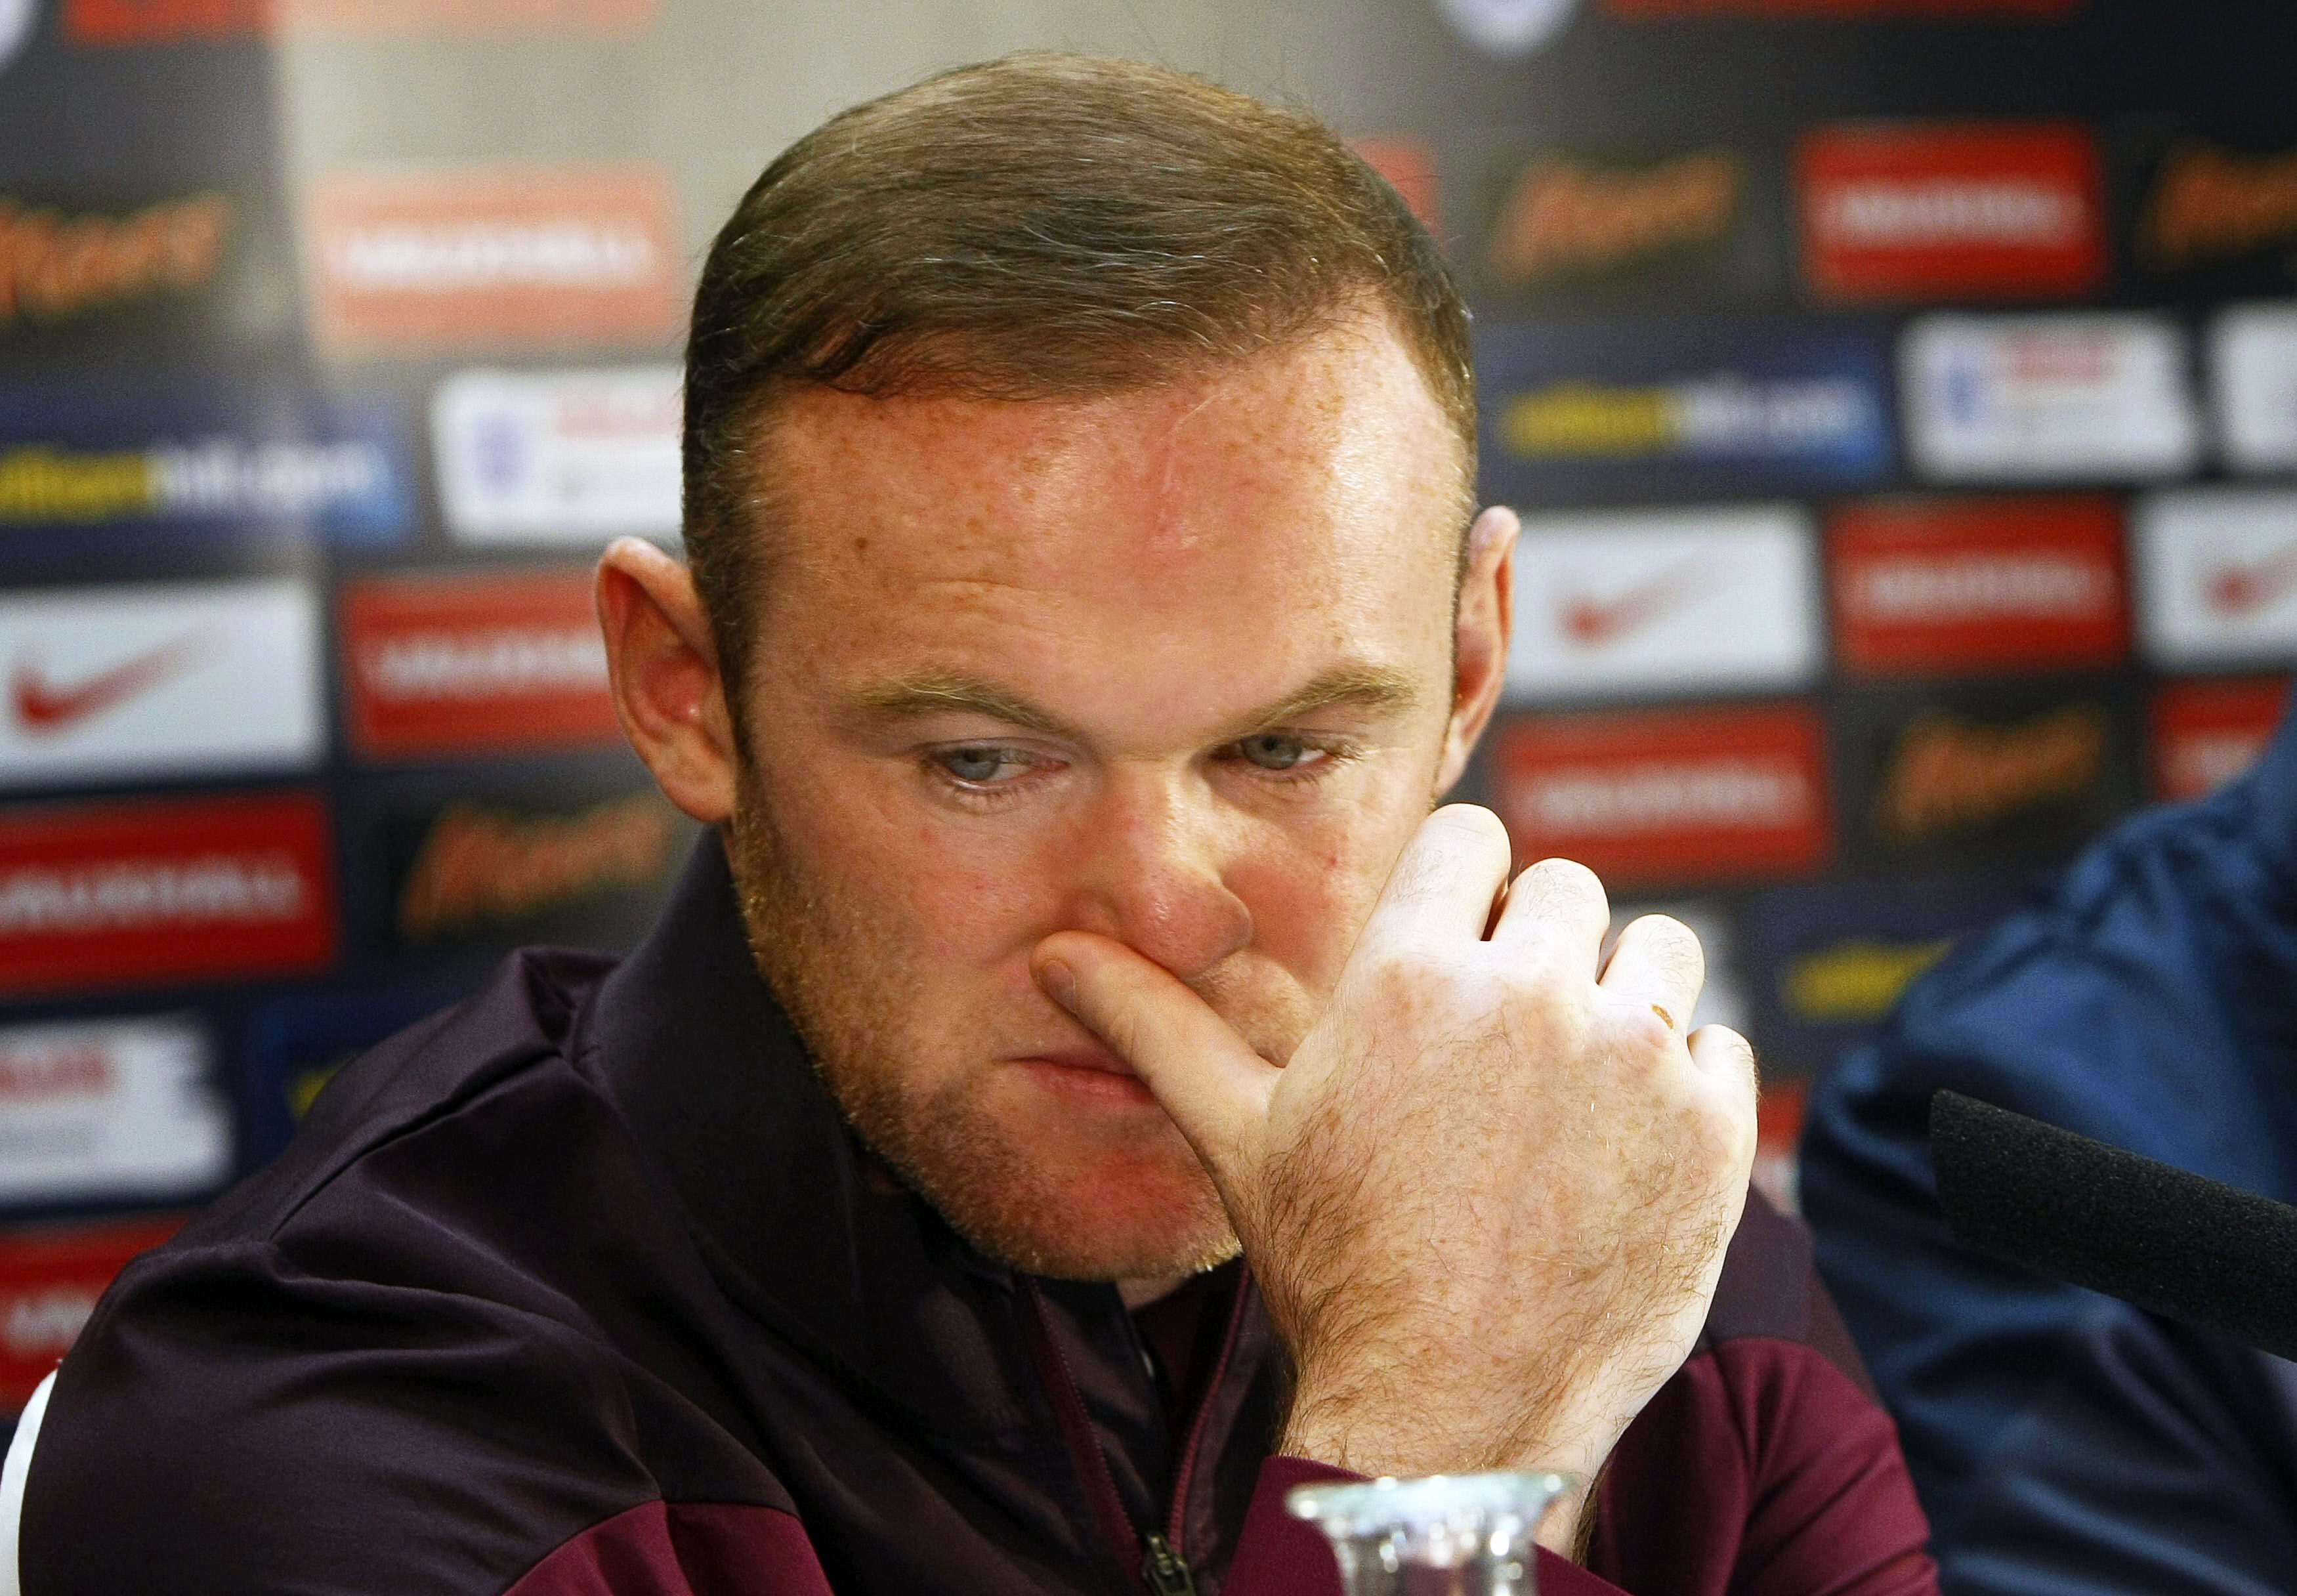 epa05022065 England player Wayne Rooney attends a press conference in Alicante, eastern Spain, 12 November 2015. England will face Spain in an international friendly soccer match on 13 November 2015.  EPA/MORELL